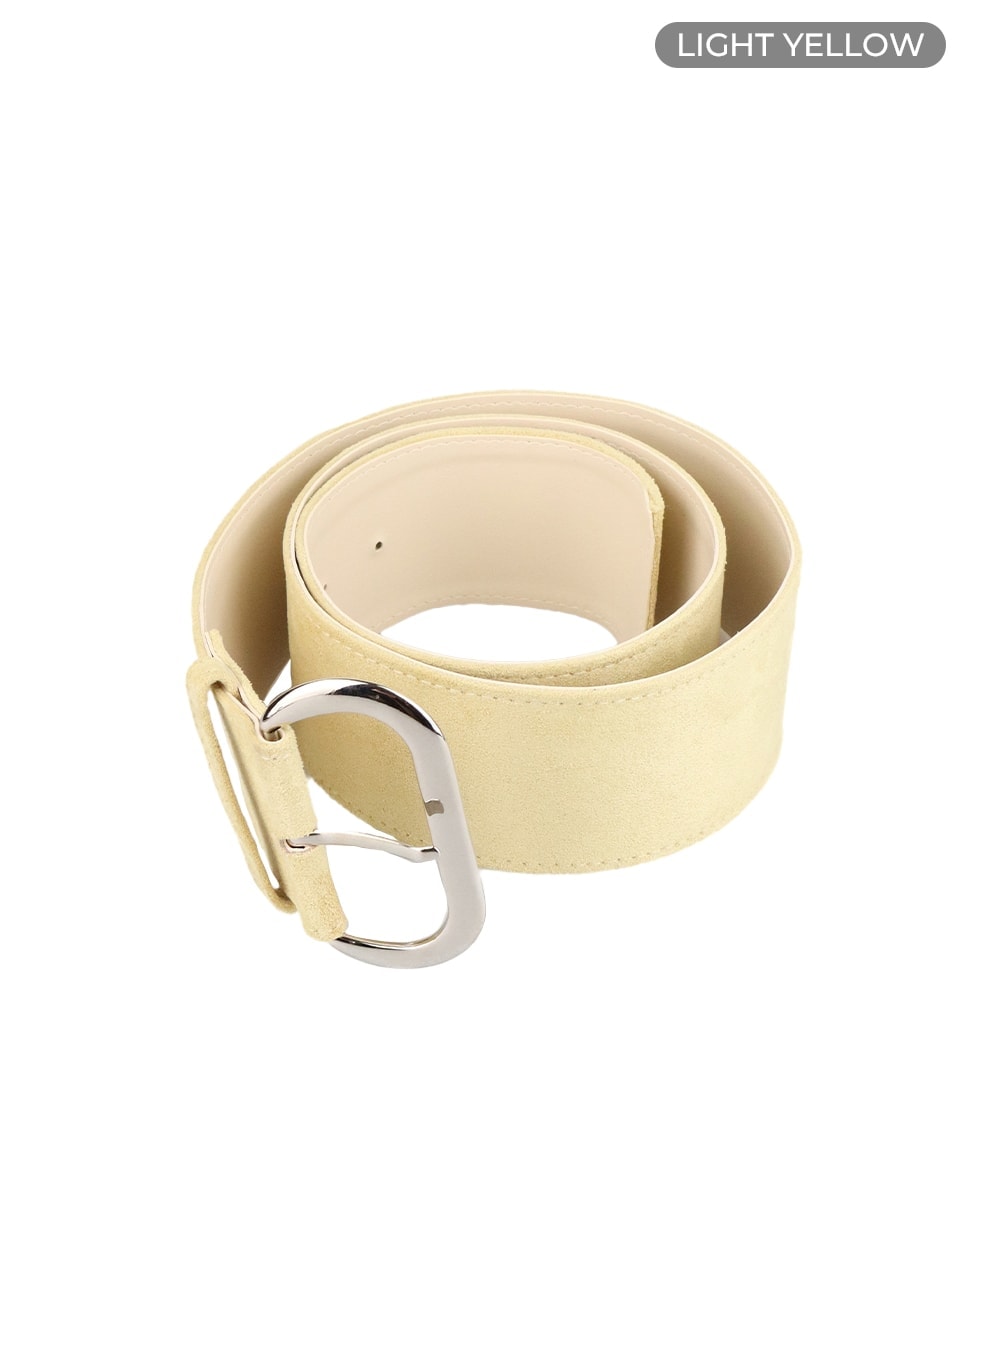 solid-suede-thick-belt-cm421 / Light yellow